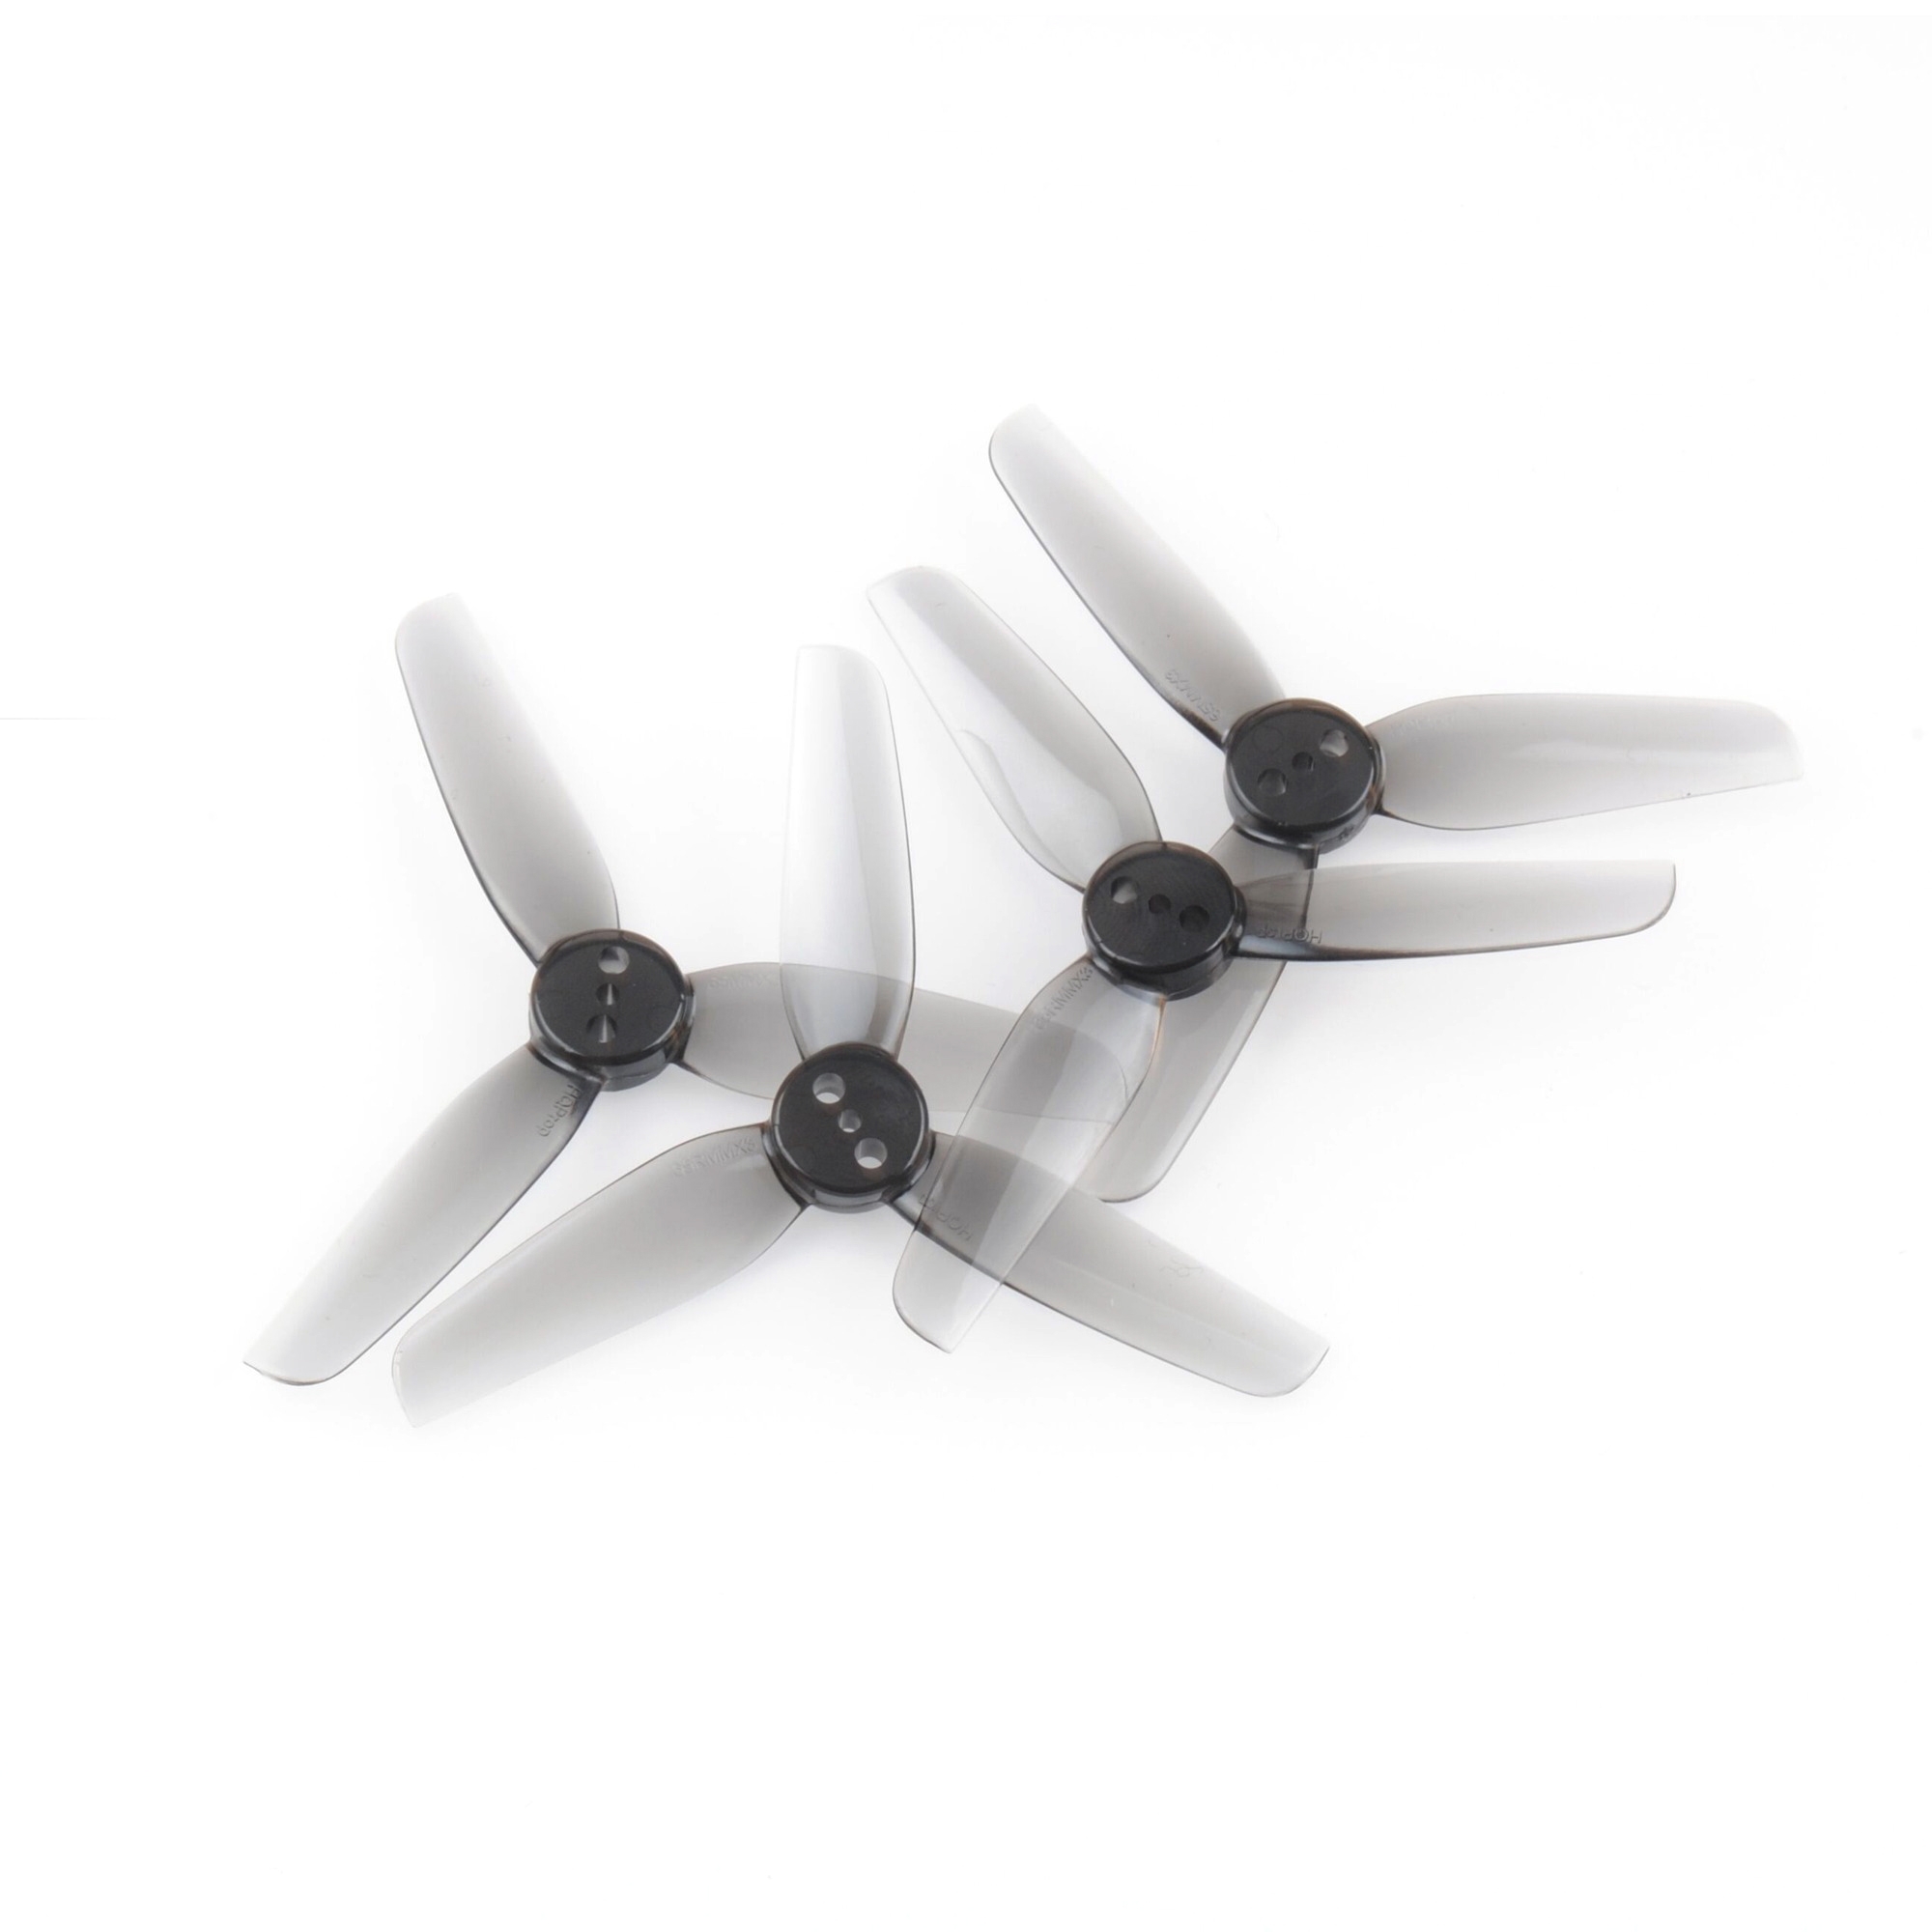 2 Pairs HQ Prop Durable T65MMX3 65mm 2.5 Inch 3-blade PC Propeller 2CW+2CCW for Toothpick TWIG Whoop RC Drone FPV Racing - Photo: 1